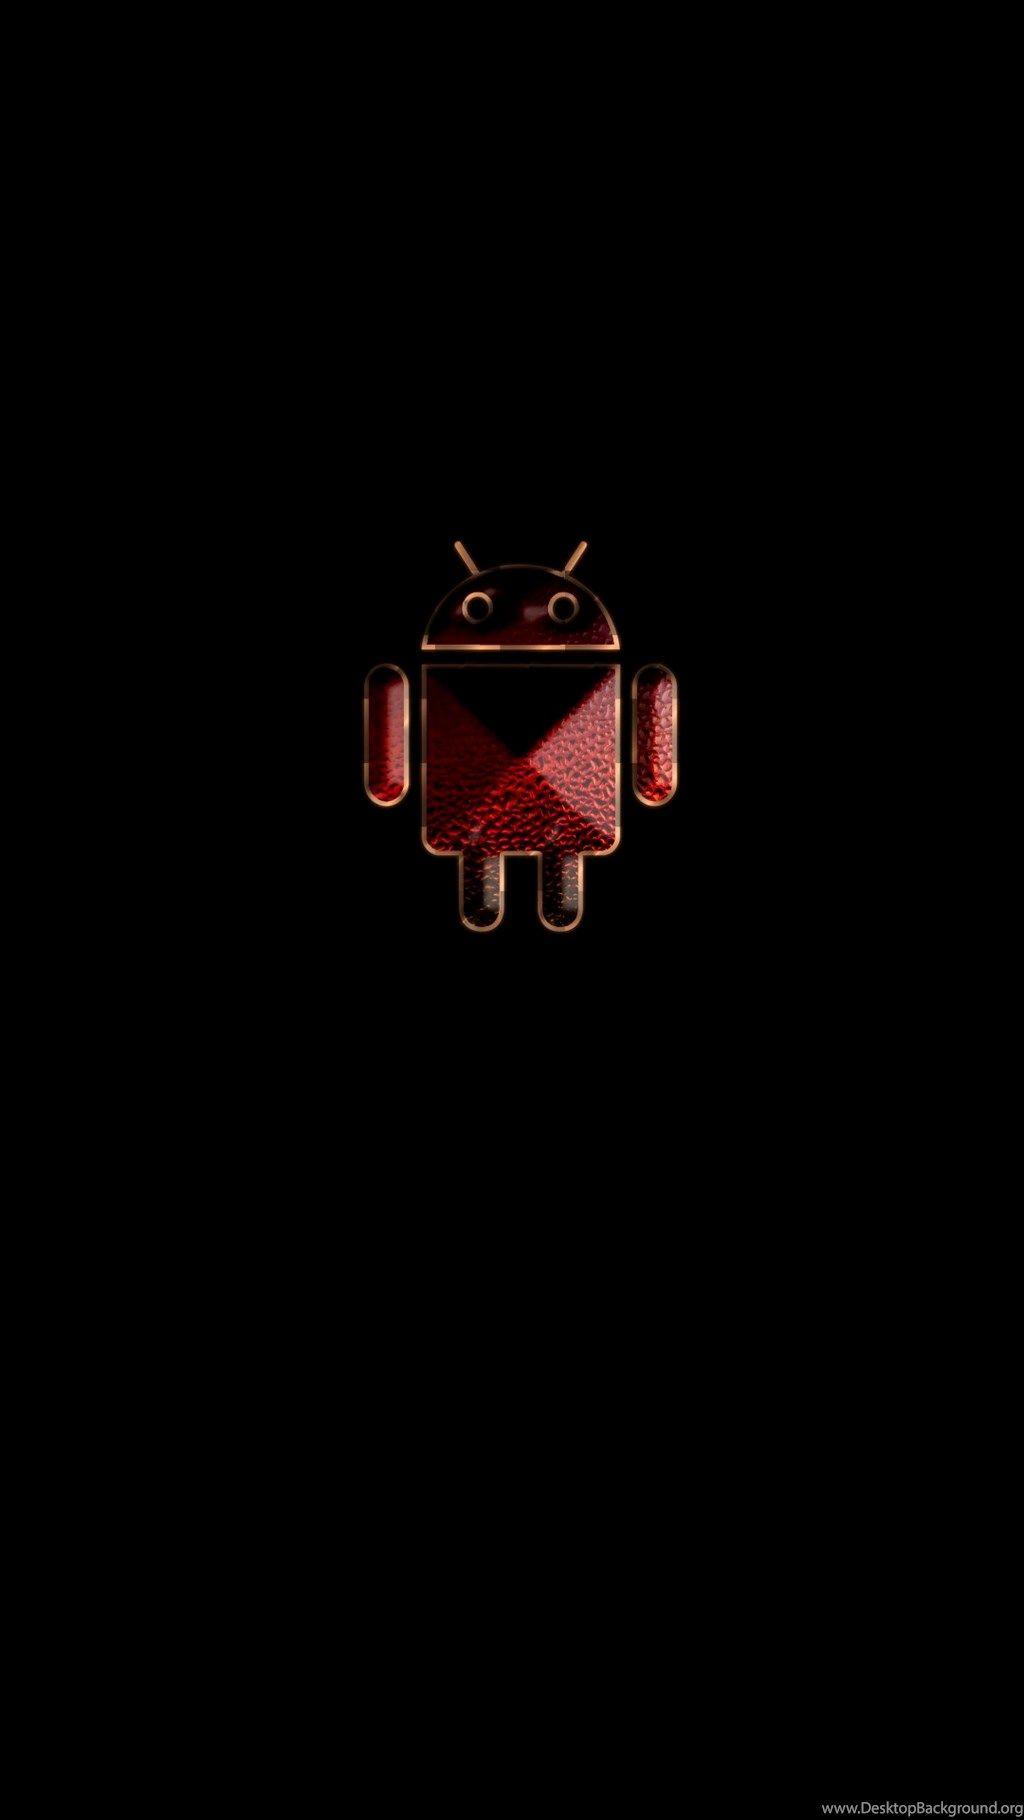 Android Logo Wallpapers - Top Free Android Logo Backgrounds